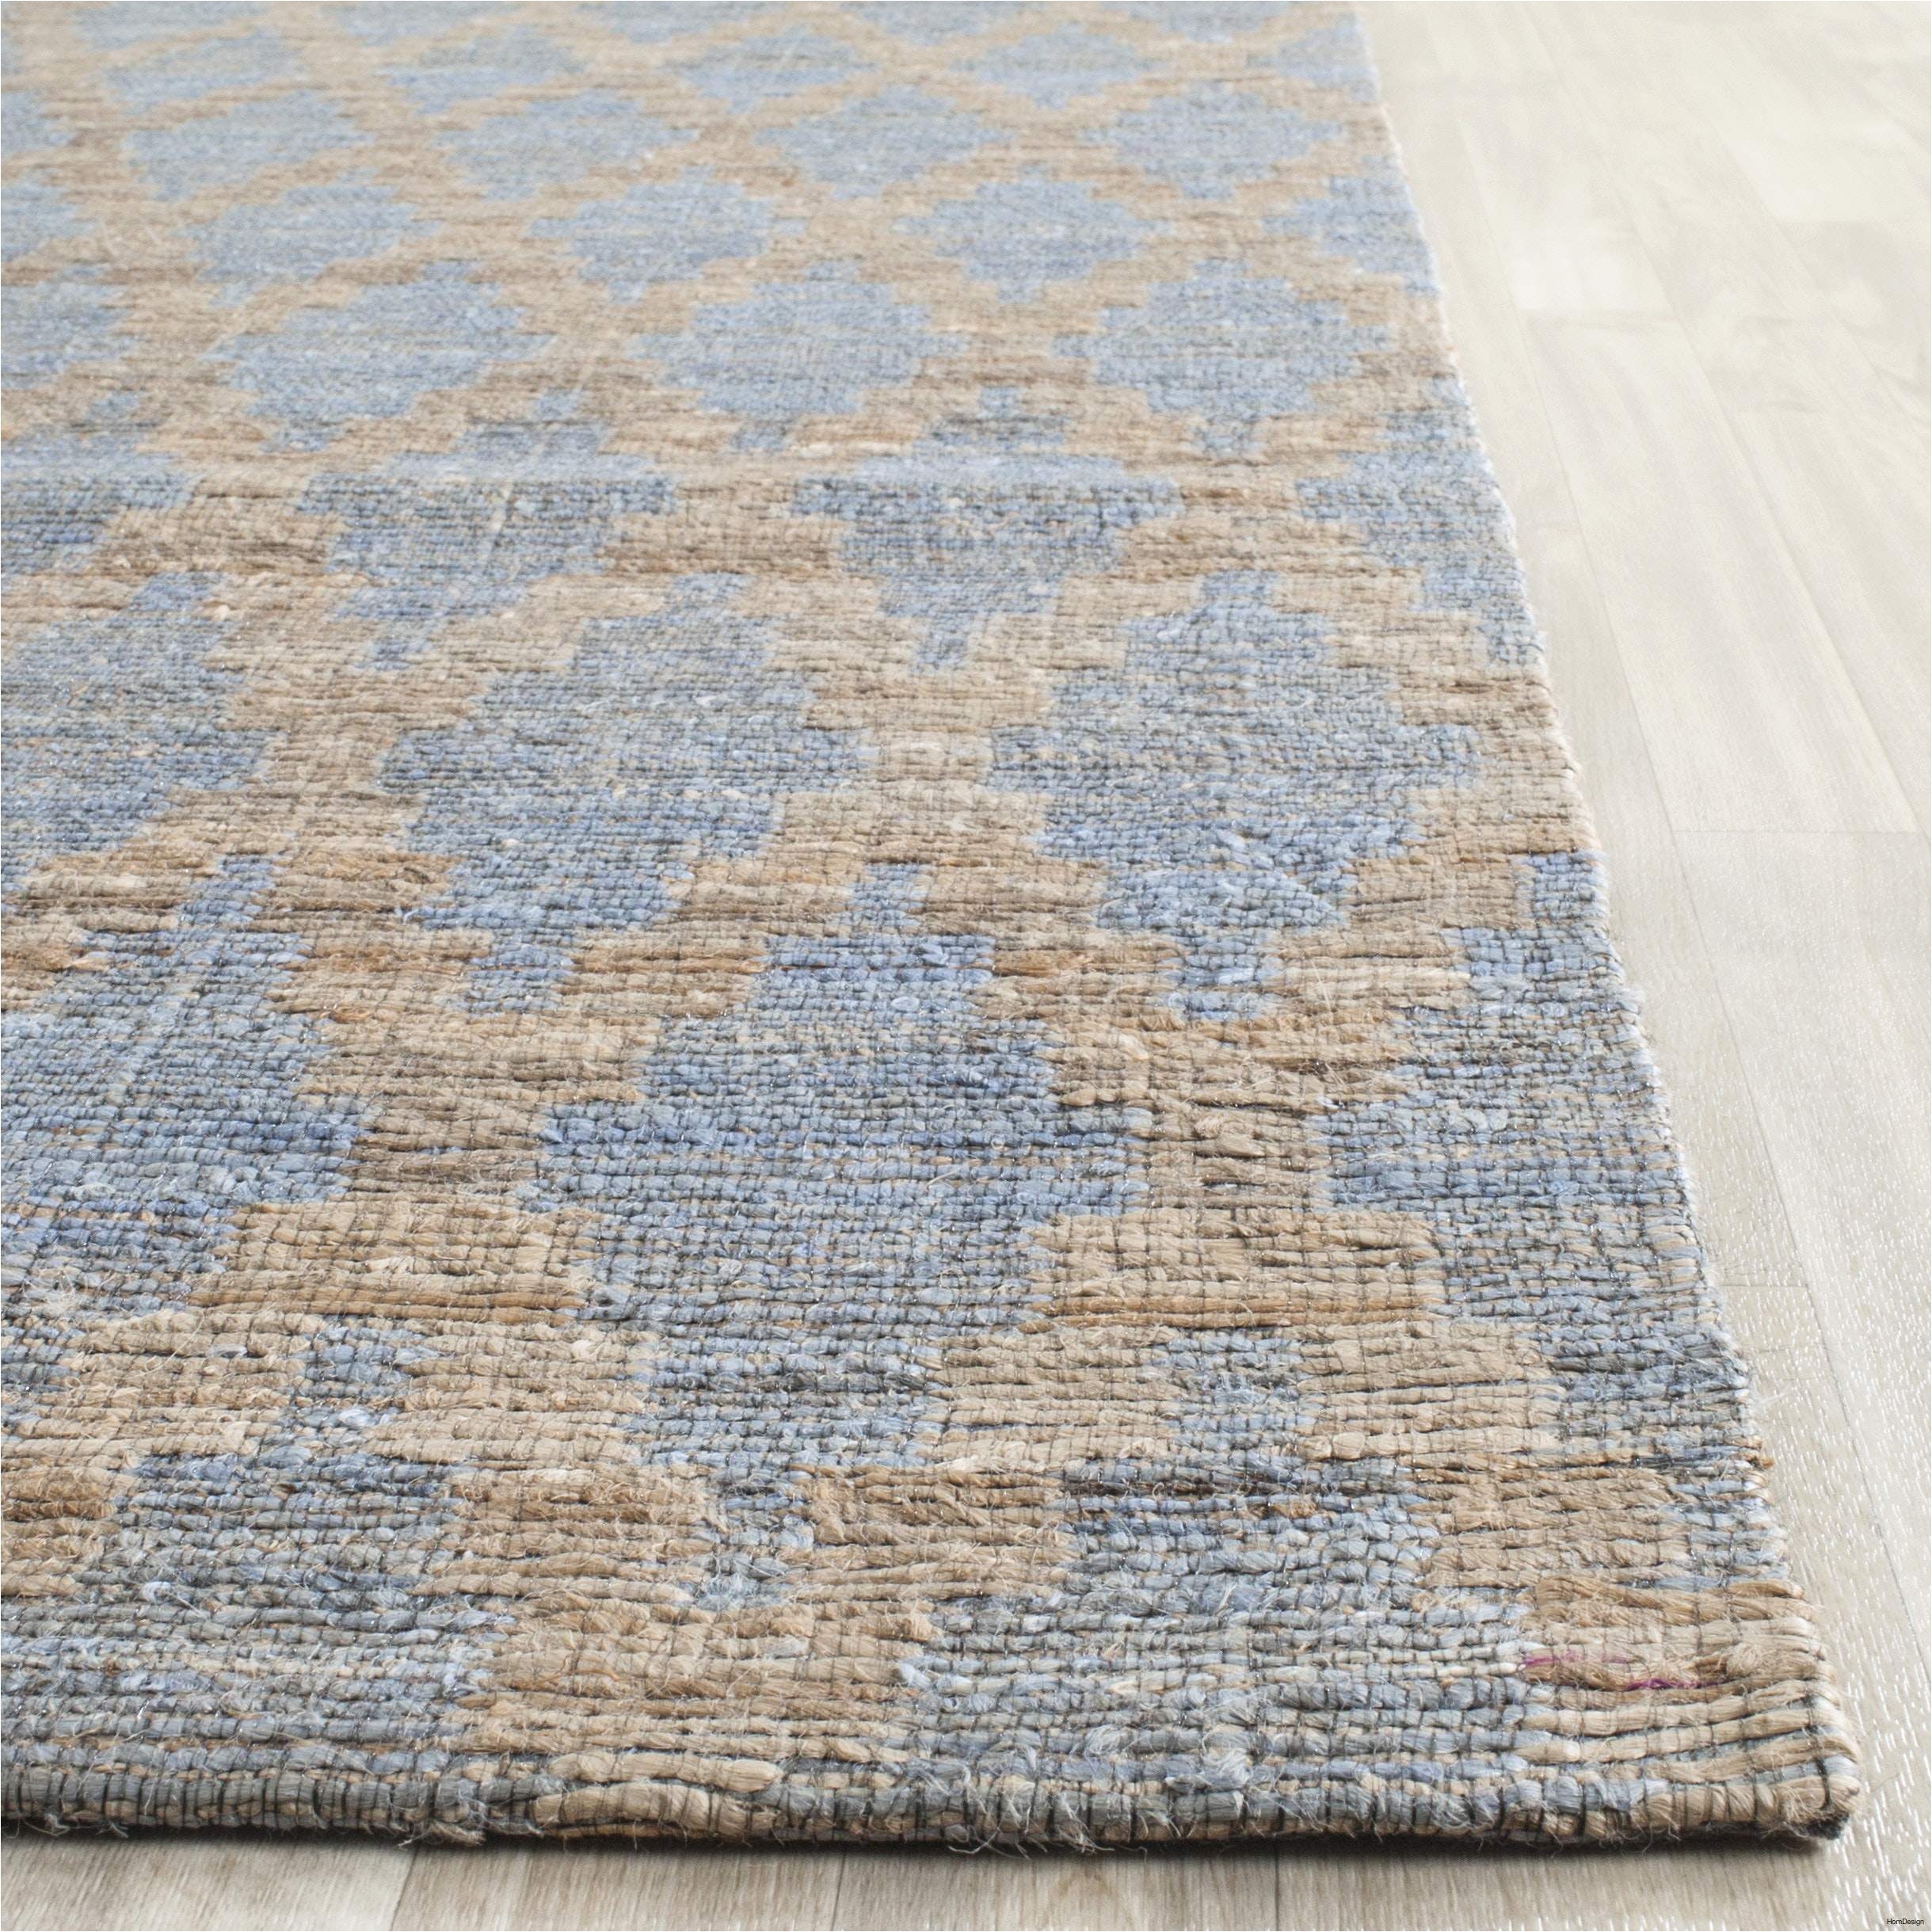 black and brown area rugs elegant rugged new cheap area rugs blue rug as gold and